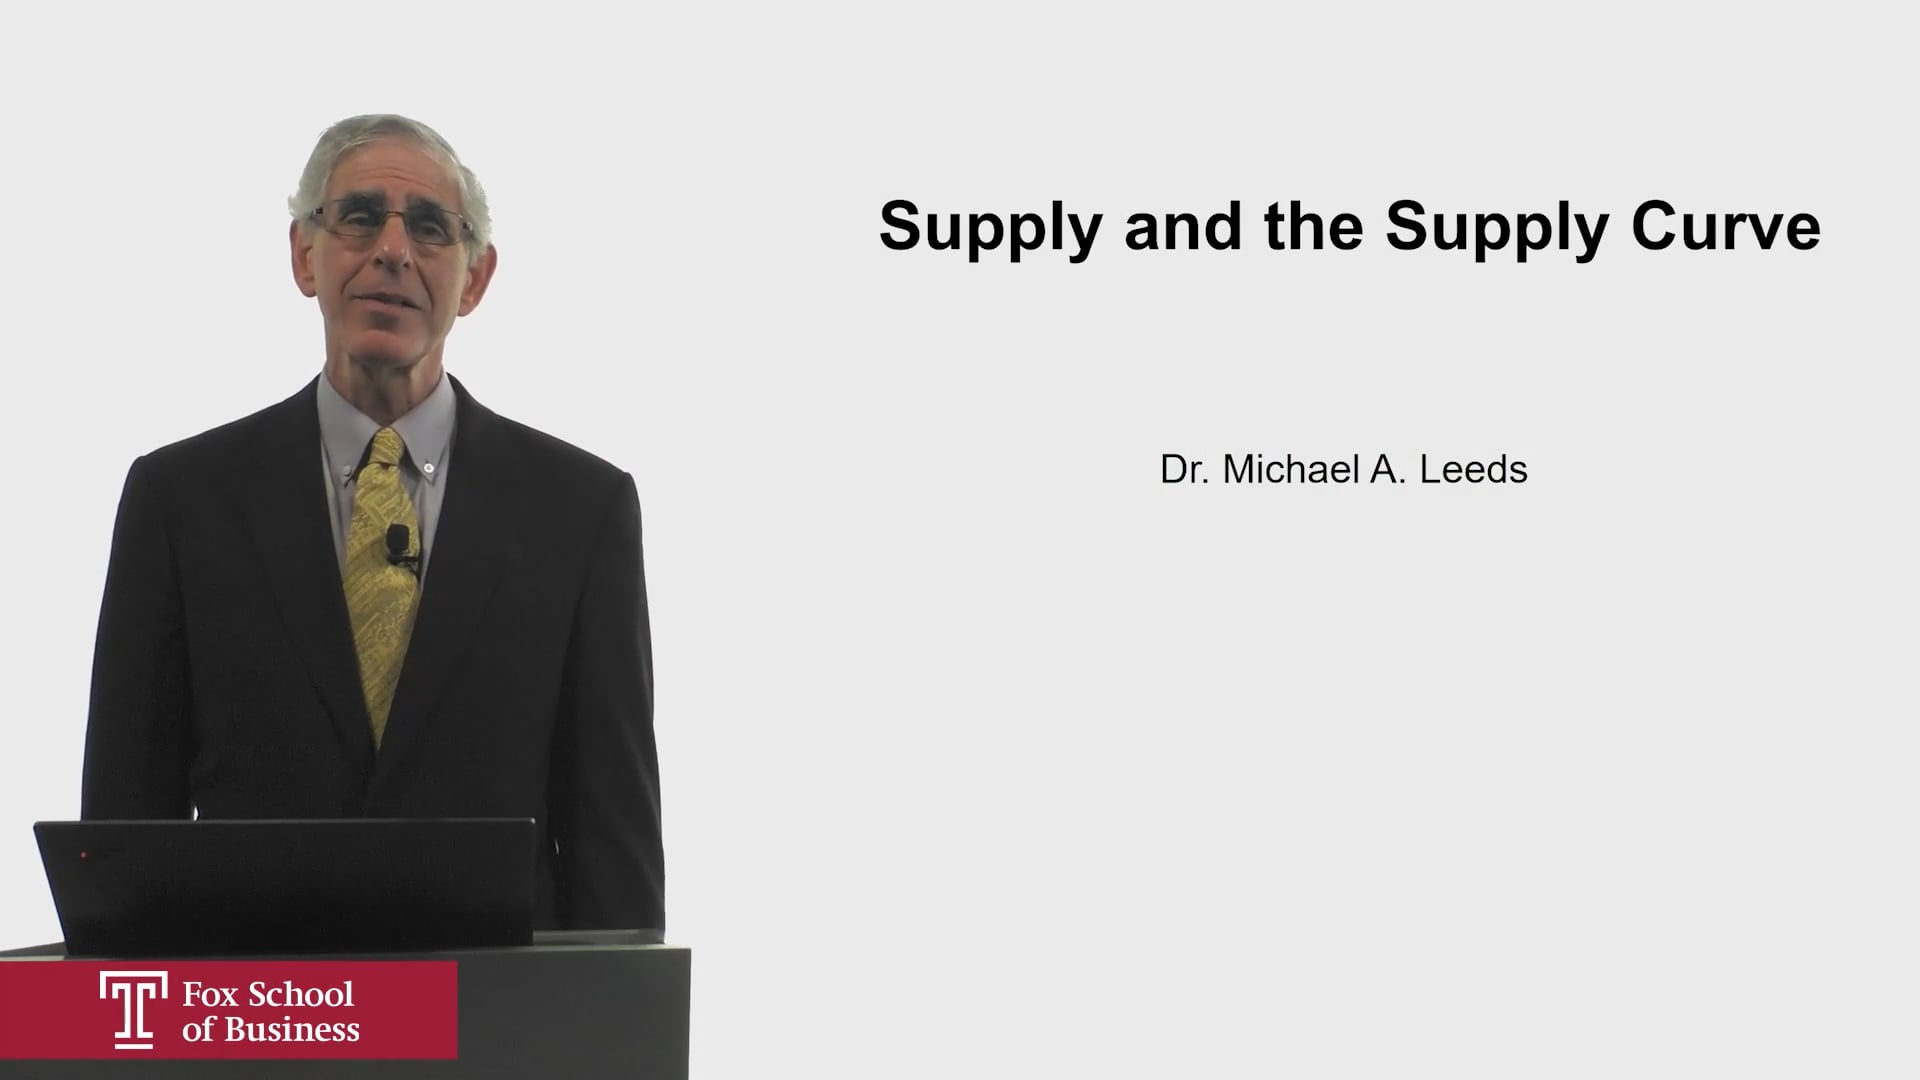 Supply and the Supply Curve